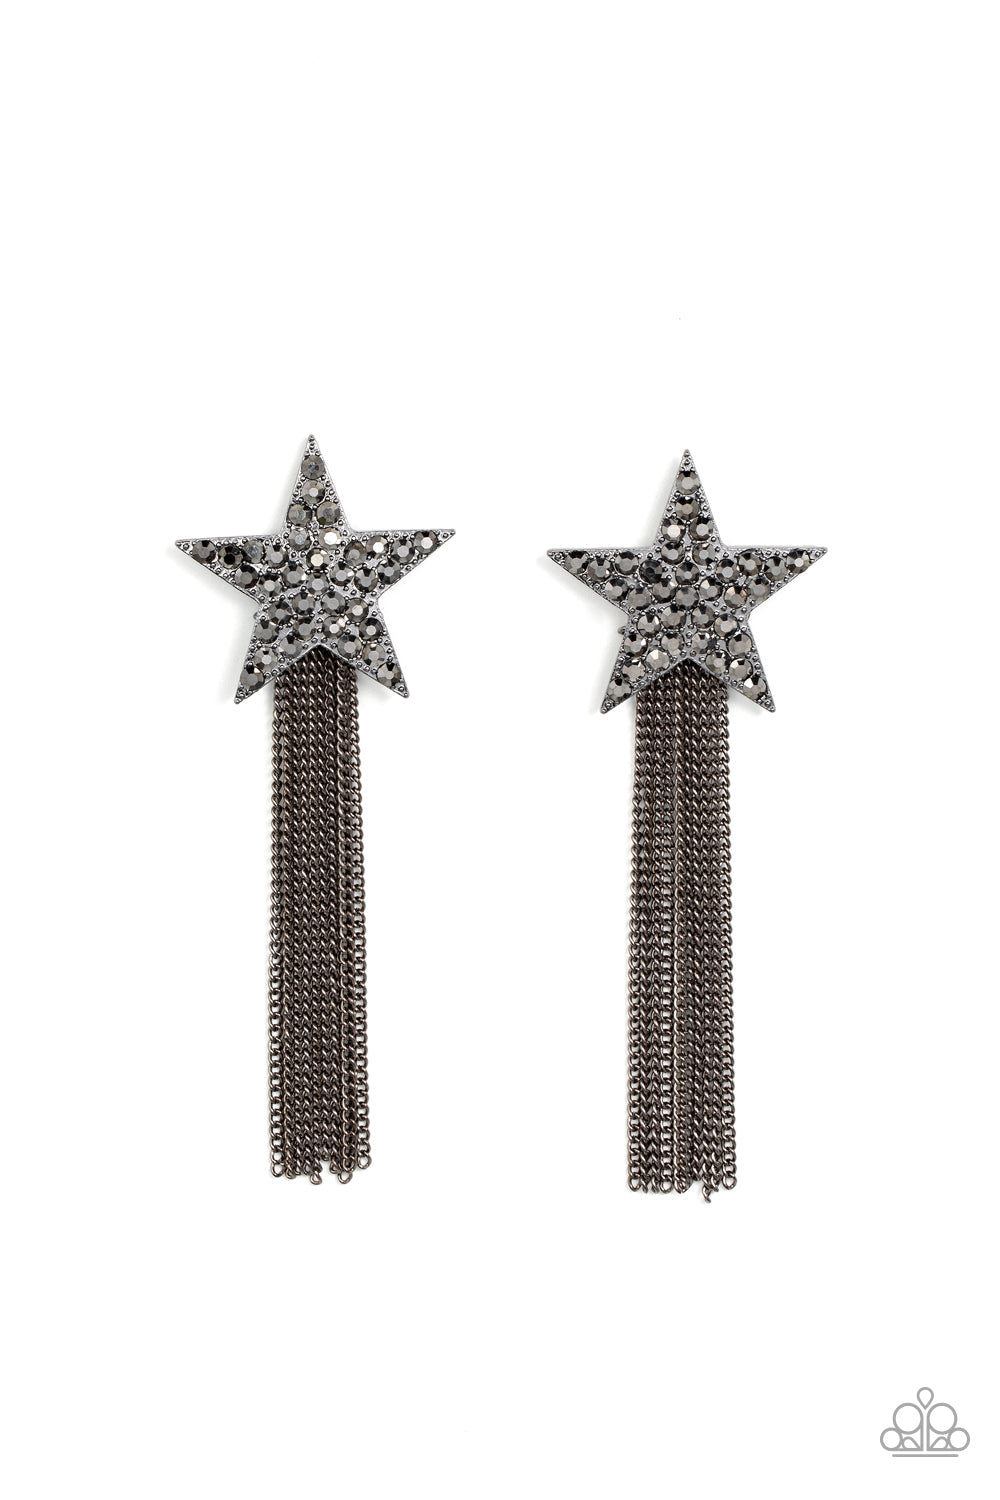 Superstar Solo - Black Earrings - Paparazzi Accessories - Bejeweled Accessories By Kristie - A curtain of gunmetal chains streams out from the bottom of an oversized gunmetal star encrusted in smoky hematite rhinestones, resulting in a stellar tassel. Earring attaches to a standard post fitting. Sold as one pair of post earrings.